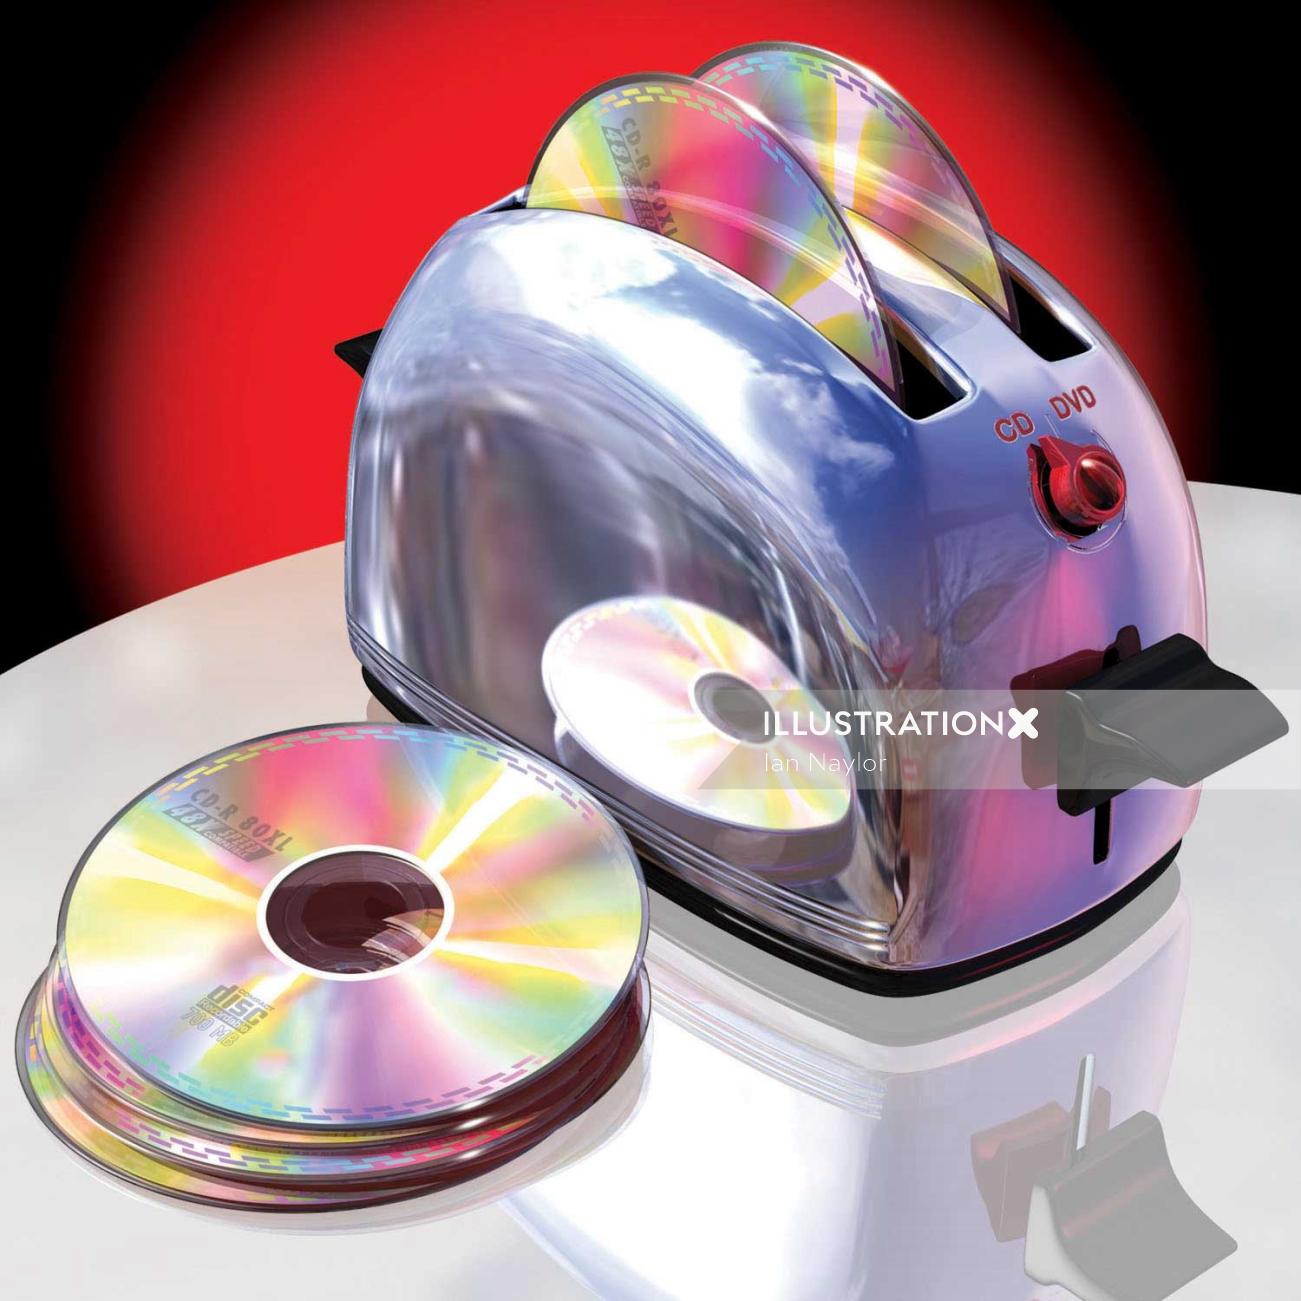 CD in Toaster
